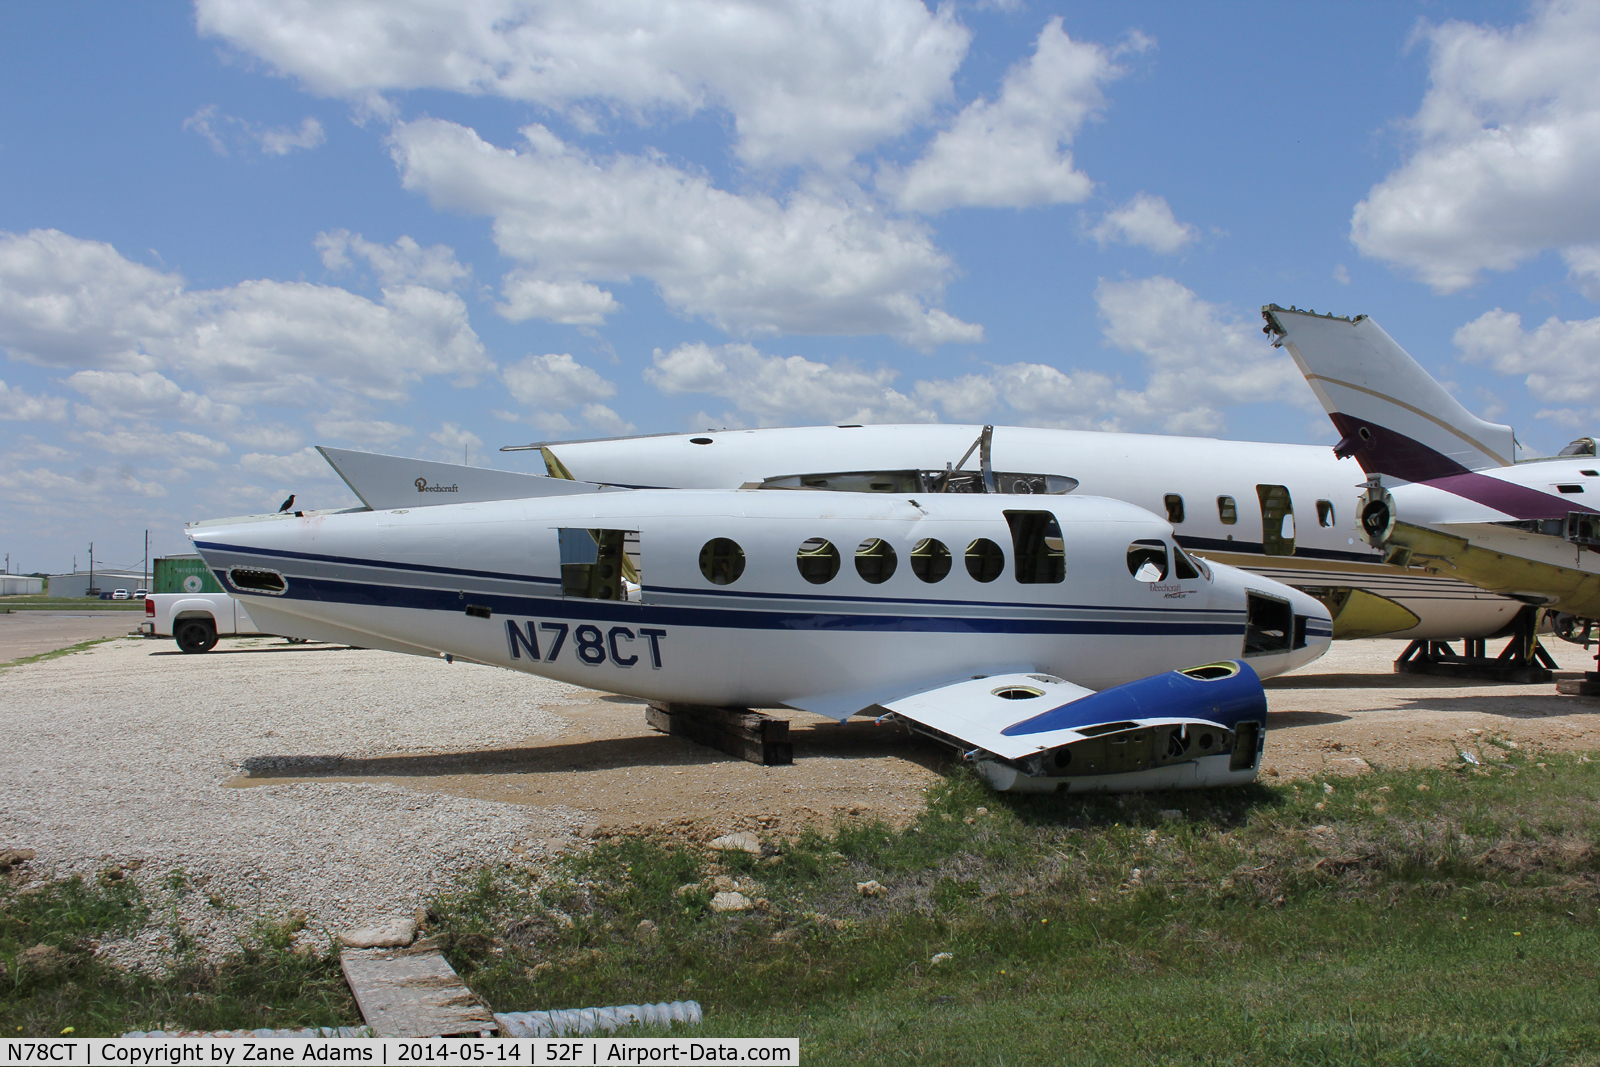 N78CT, 1980 Beech 200 C/N BB-761, Noted at Northwest Regional Airport - Ft. Worth, TX